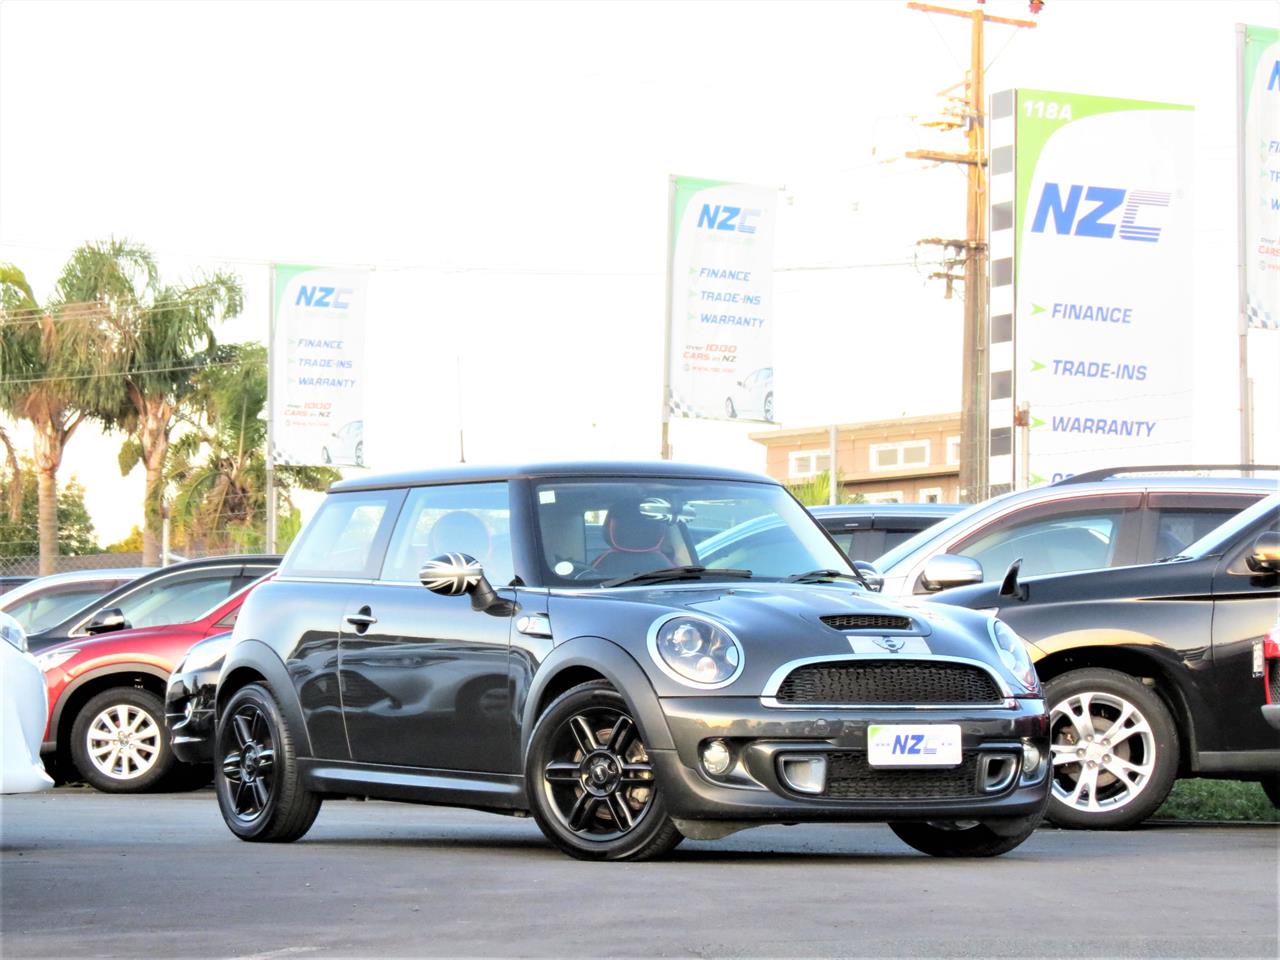 NZC 2013 Mini Cooper just arrived to Auckland